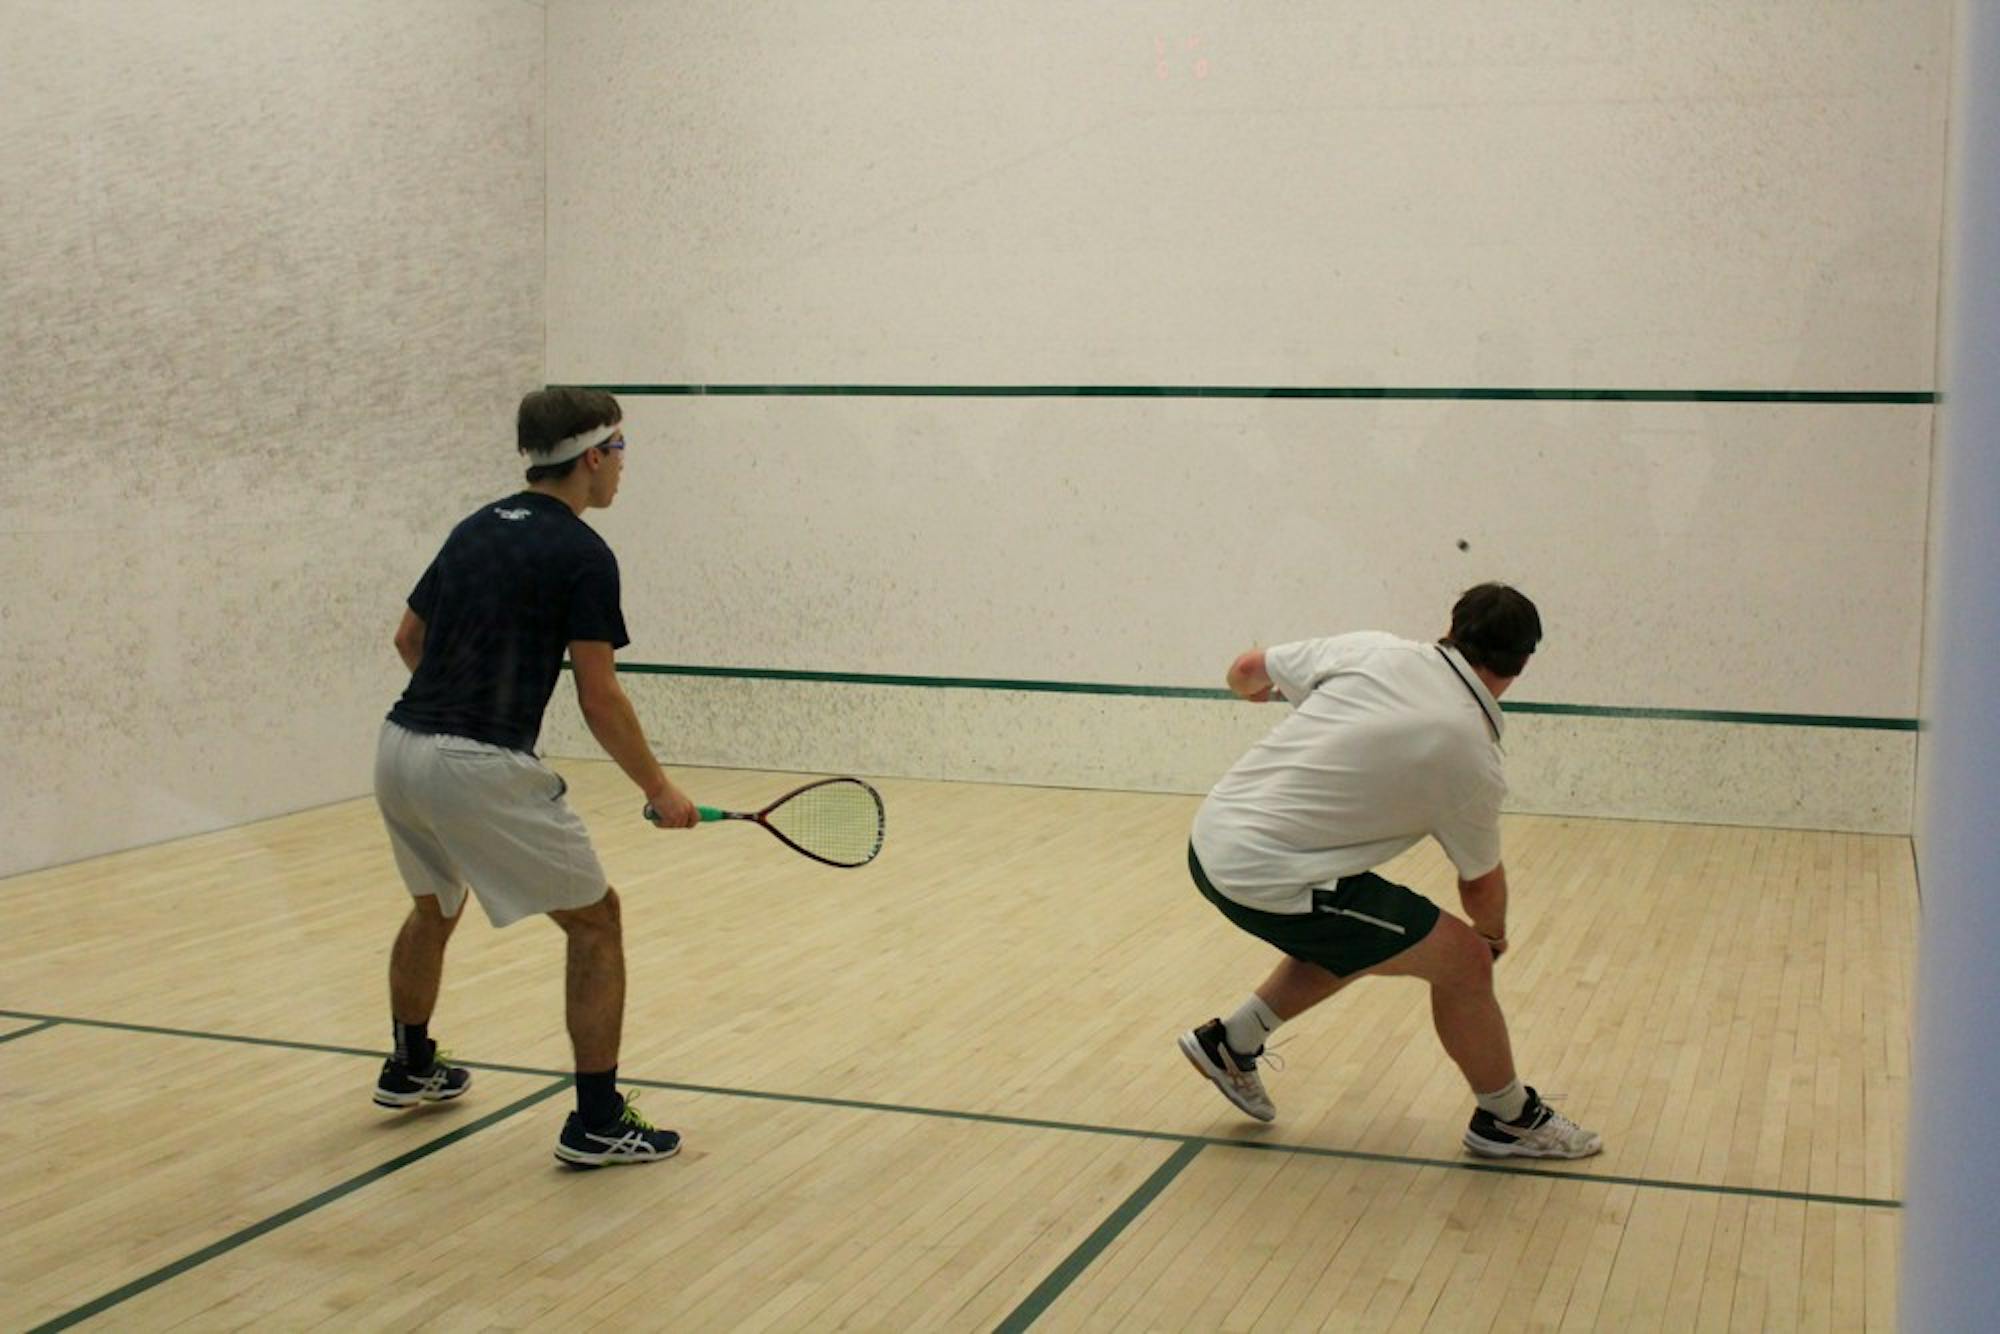 Squash is a highly strategic game that originated in the 1830s at Harrow School, an elite boarding school in England.